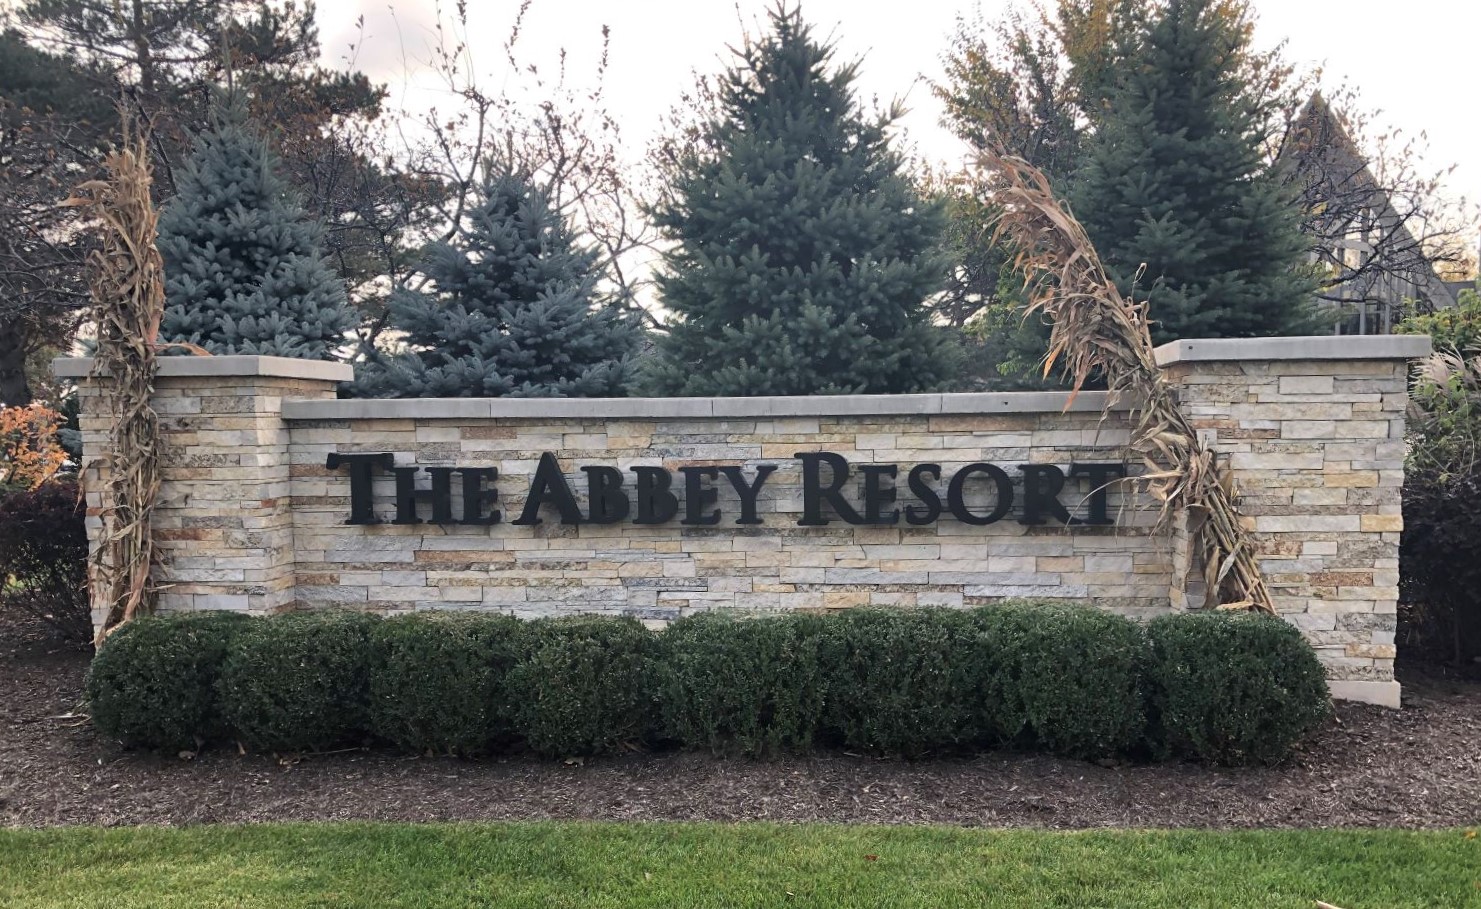 Abbey Resort and Avani Spa Sign